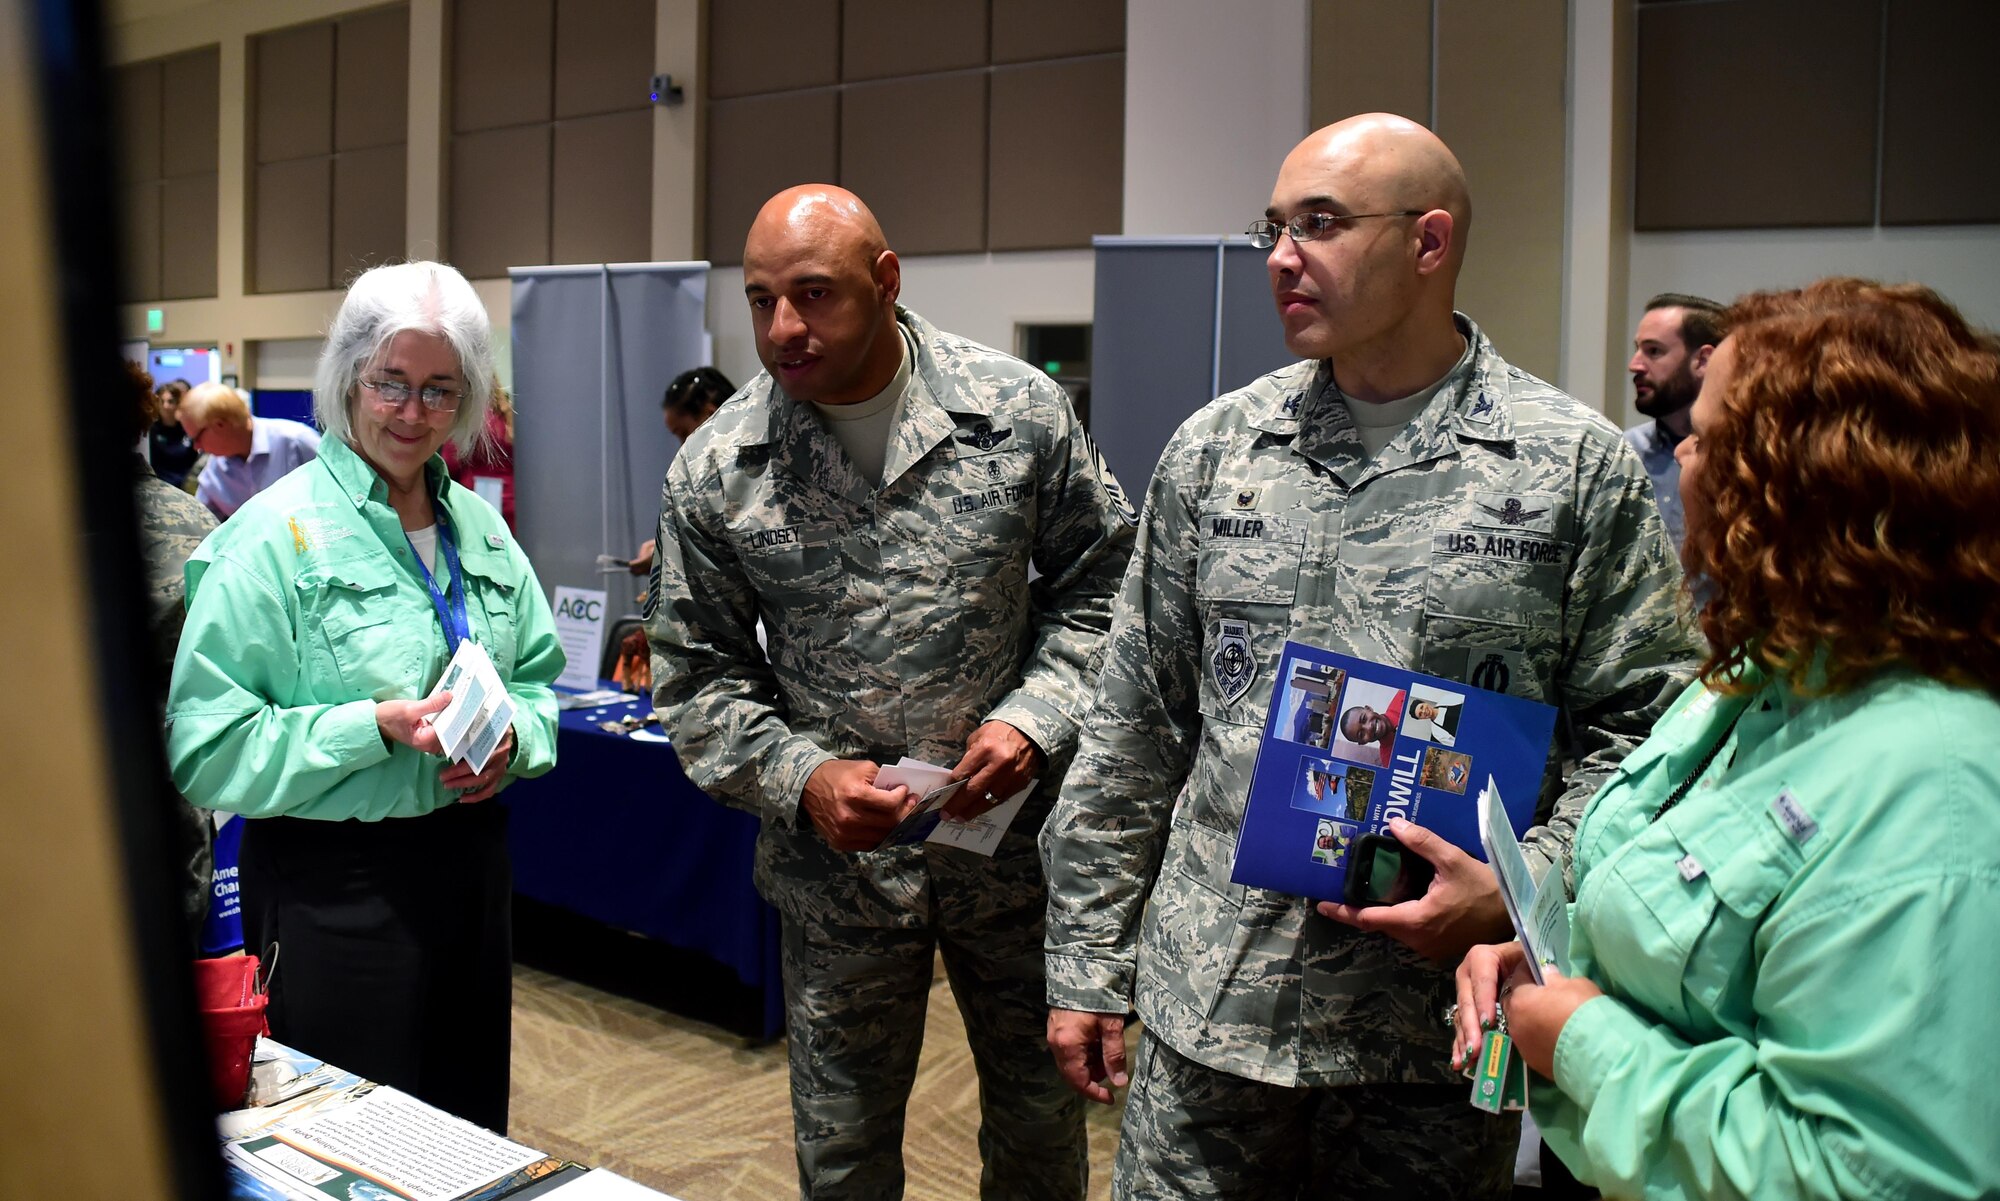 Col. David Miller Jr.(right), 460th Space Wing commander and Chief Master Sgt. Rod Lindsey, 460th Space Wing command chief, visit with organizations to learn more about their mission during the Combined Federal Campaign fair Oct. 12, 2016, on Buckley Air Force Base, Colo. More than 70 organizations attended the fair to educate base members on their options for donating. (Air Force photo by Airman Holden S. Faul/Released)